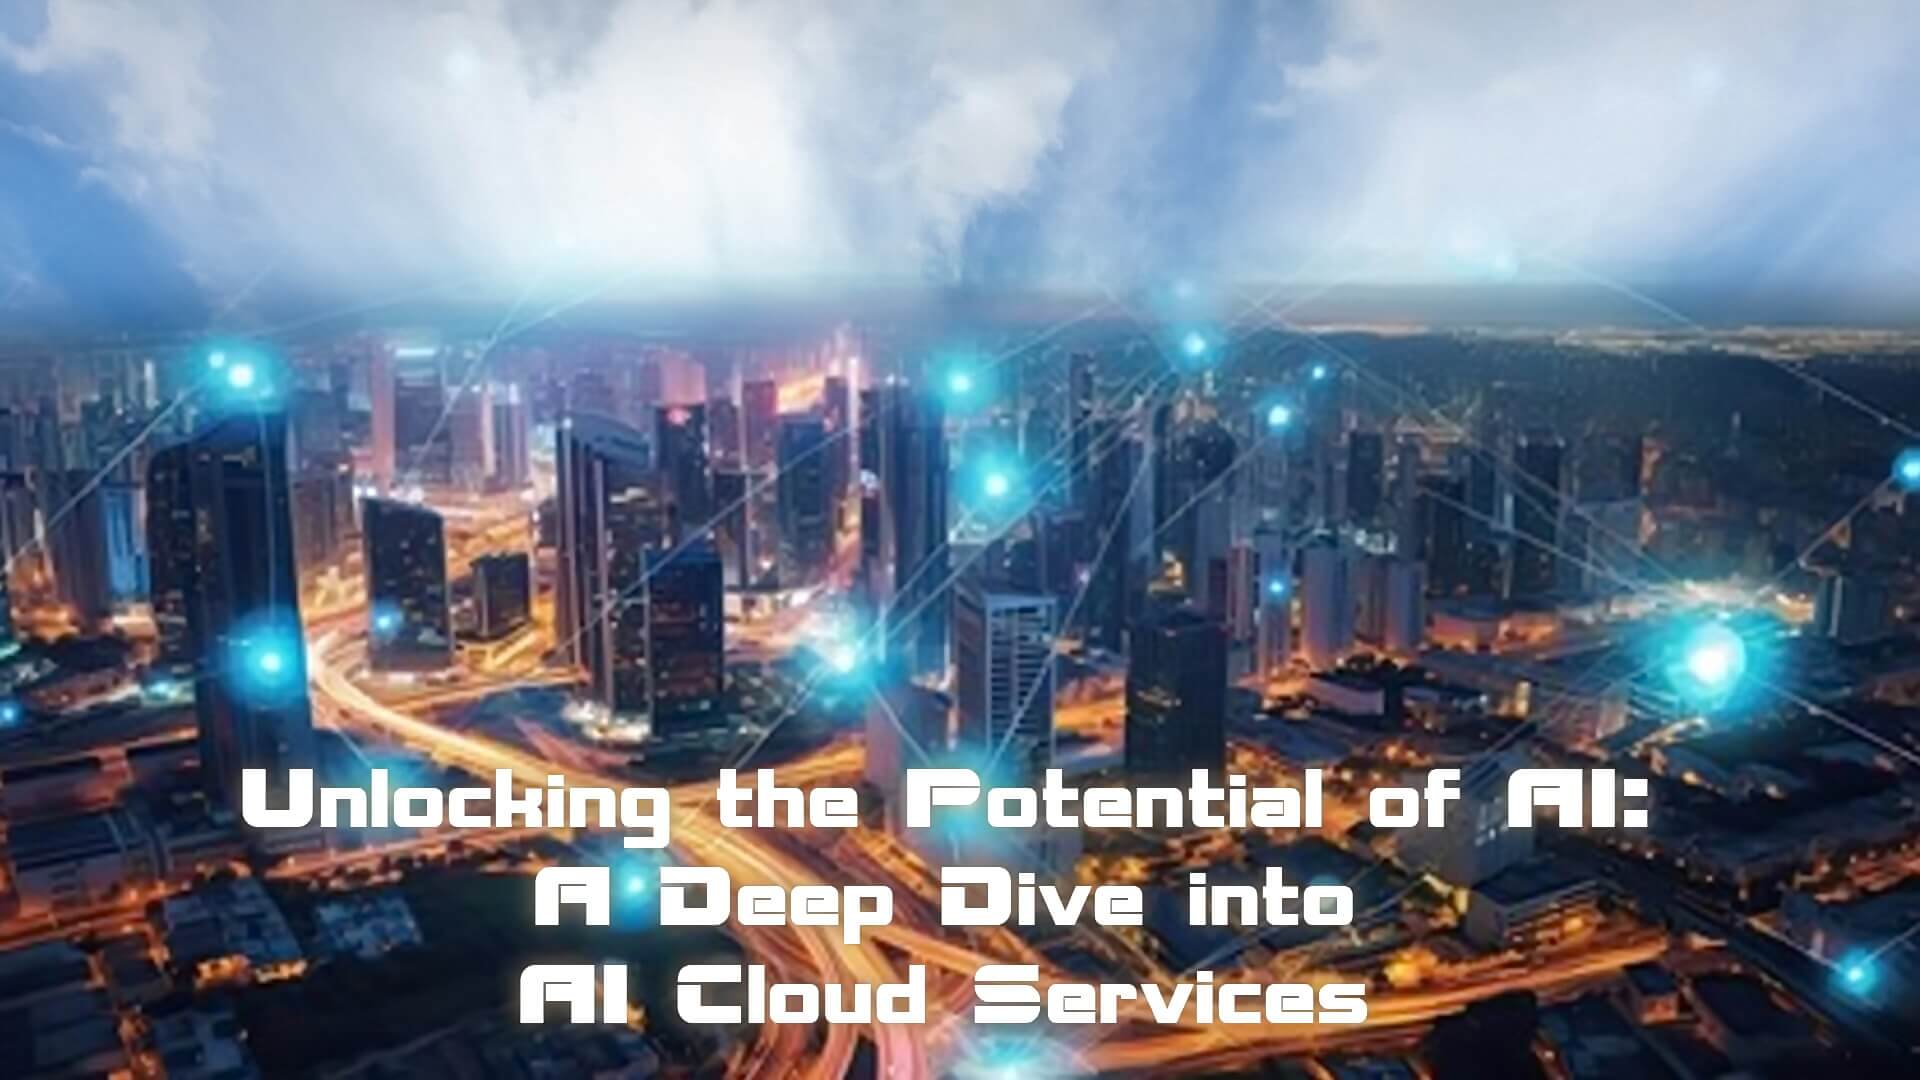 Unlocking the Potential of AI: A Deep Dive into AI Cloud Services